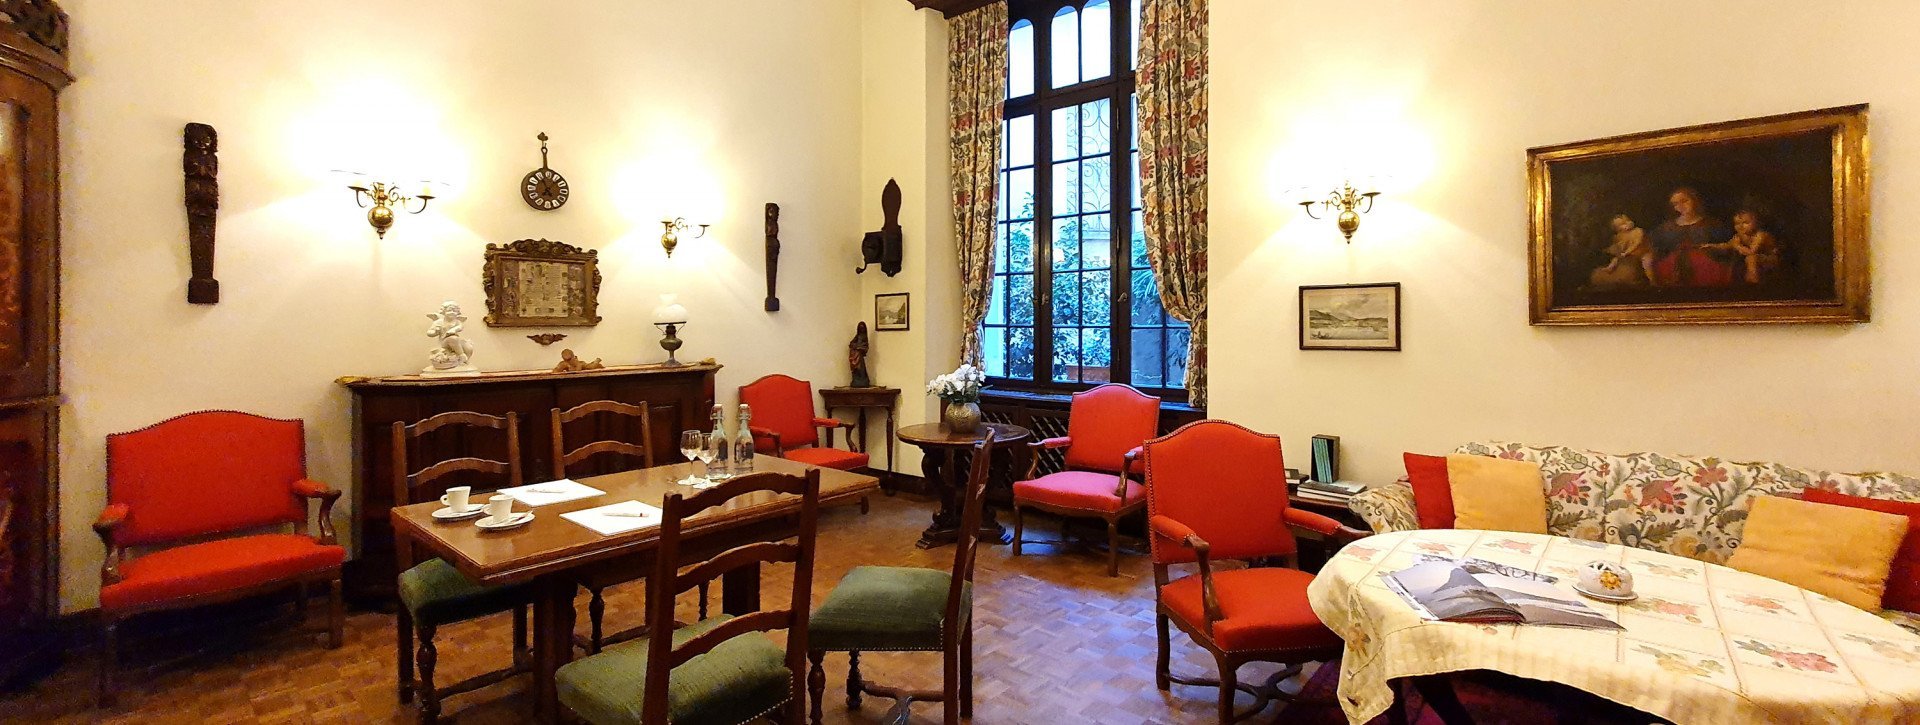 Small conference room for workshops and private meetings in the centre of Lugano close to public transport